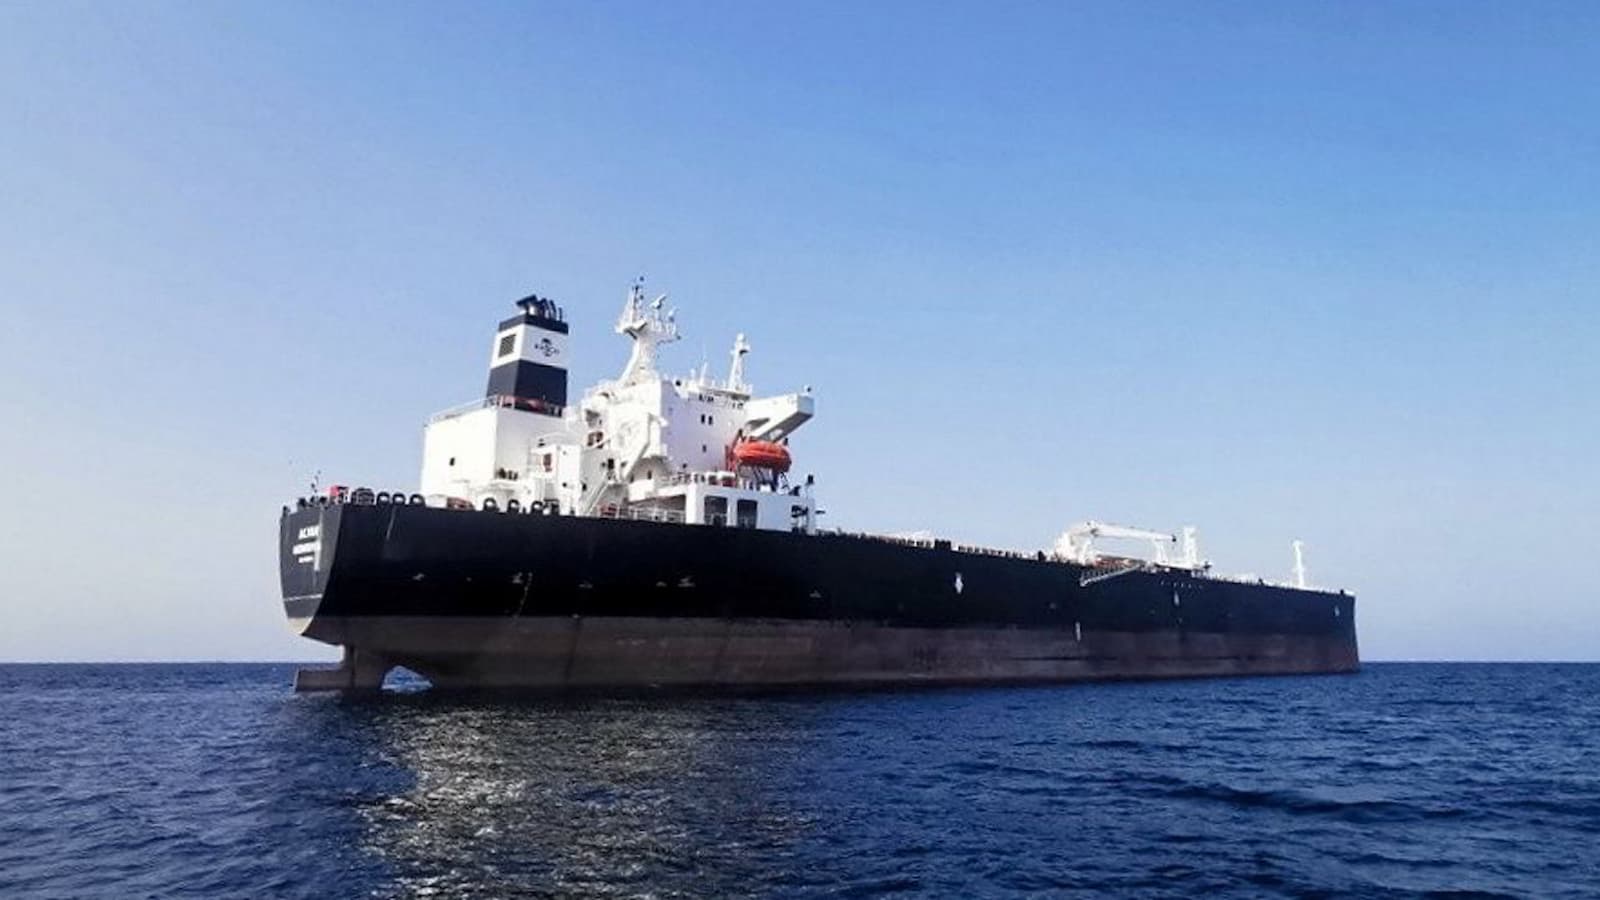 Panamax and Aframax Tankers, difference between Panamax and Aframax Tankers